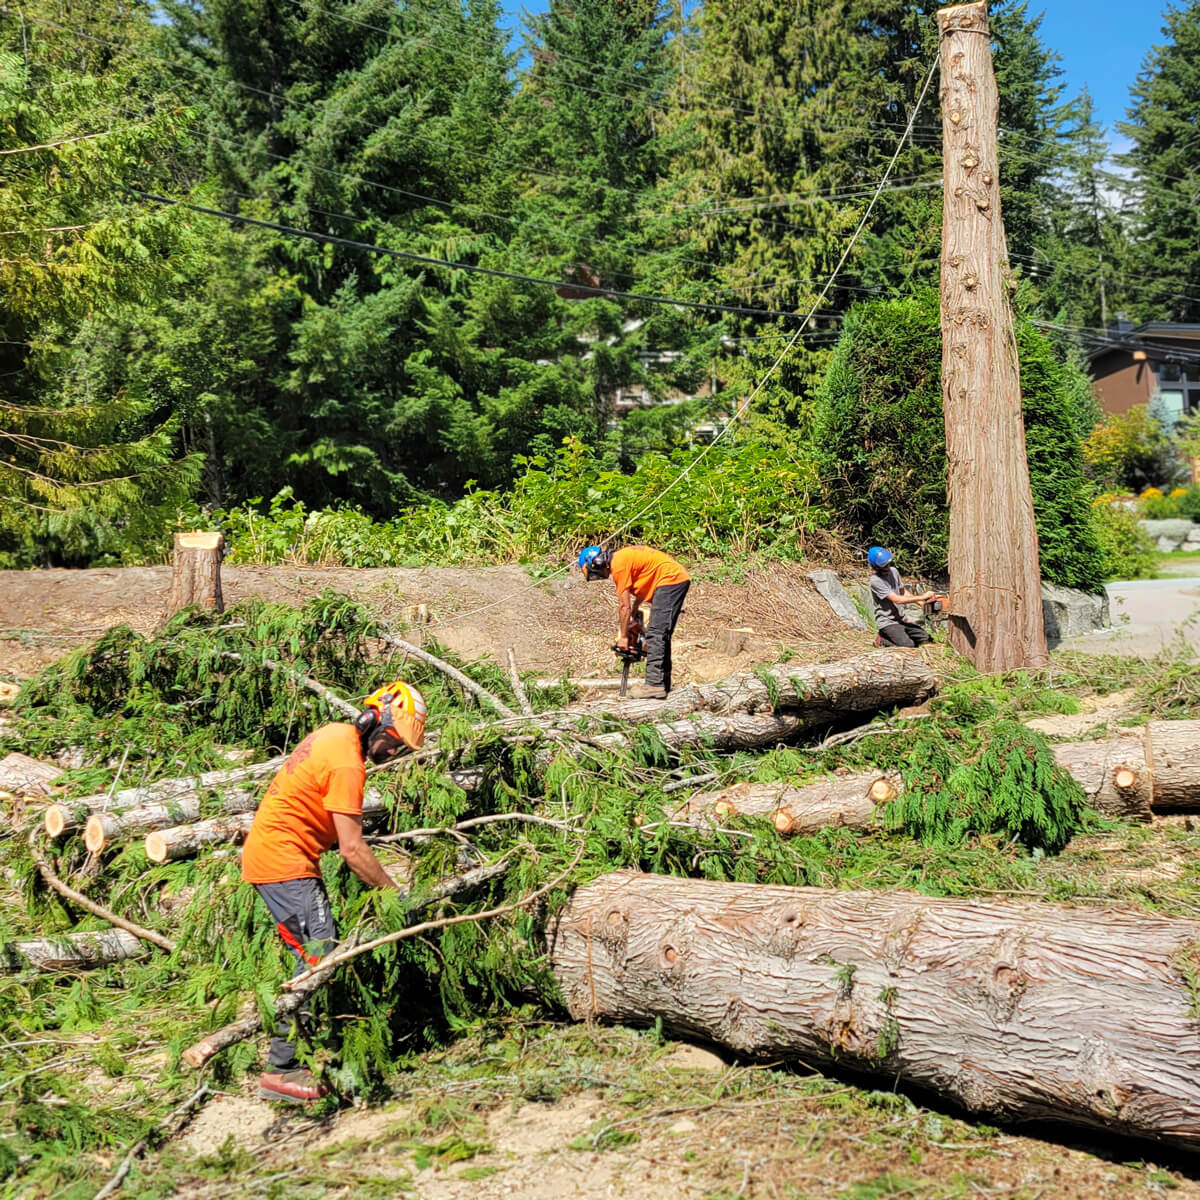 The Garibaldi Tree crew clearing a lot on a summer day in Whistler, B.C. One employee is hauling brush, and two others are using chainsaws to cut up trees.